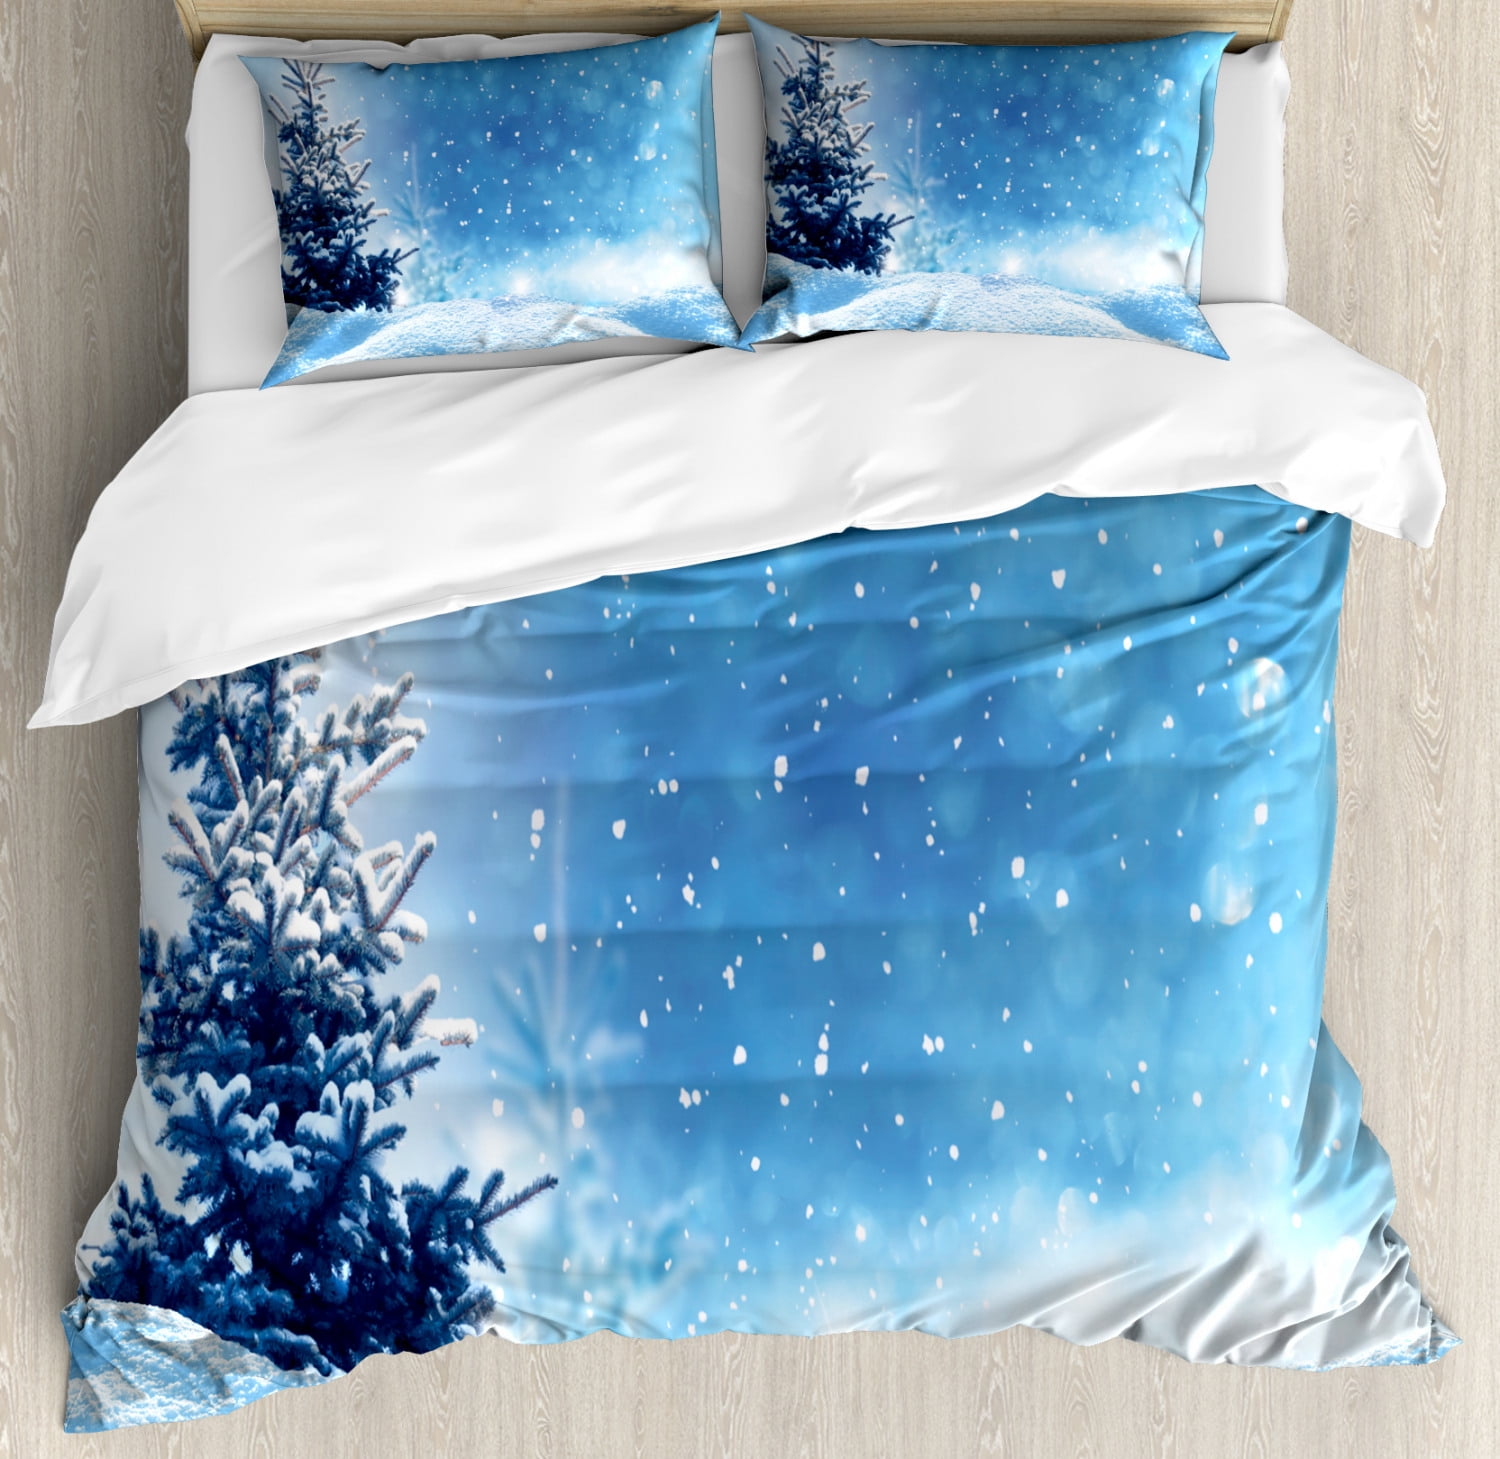 Deep Sky Blue Multicolor Lunarable Ski Bedspread Twin Size Decorative Quilted 2 Piece Coverlet Set with Pillow Sham Pattern of a Girl in Winter Ski Outfit with Snowy Mountains on The Back 